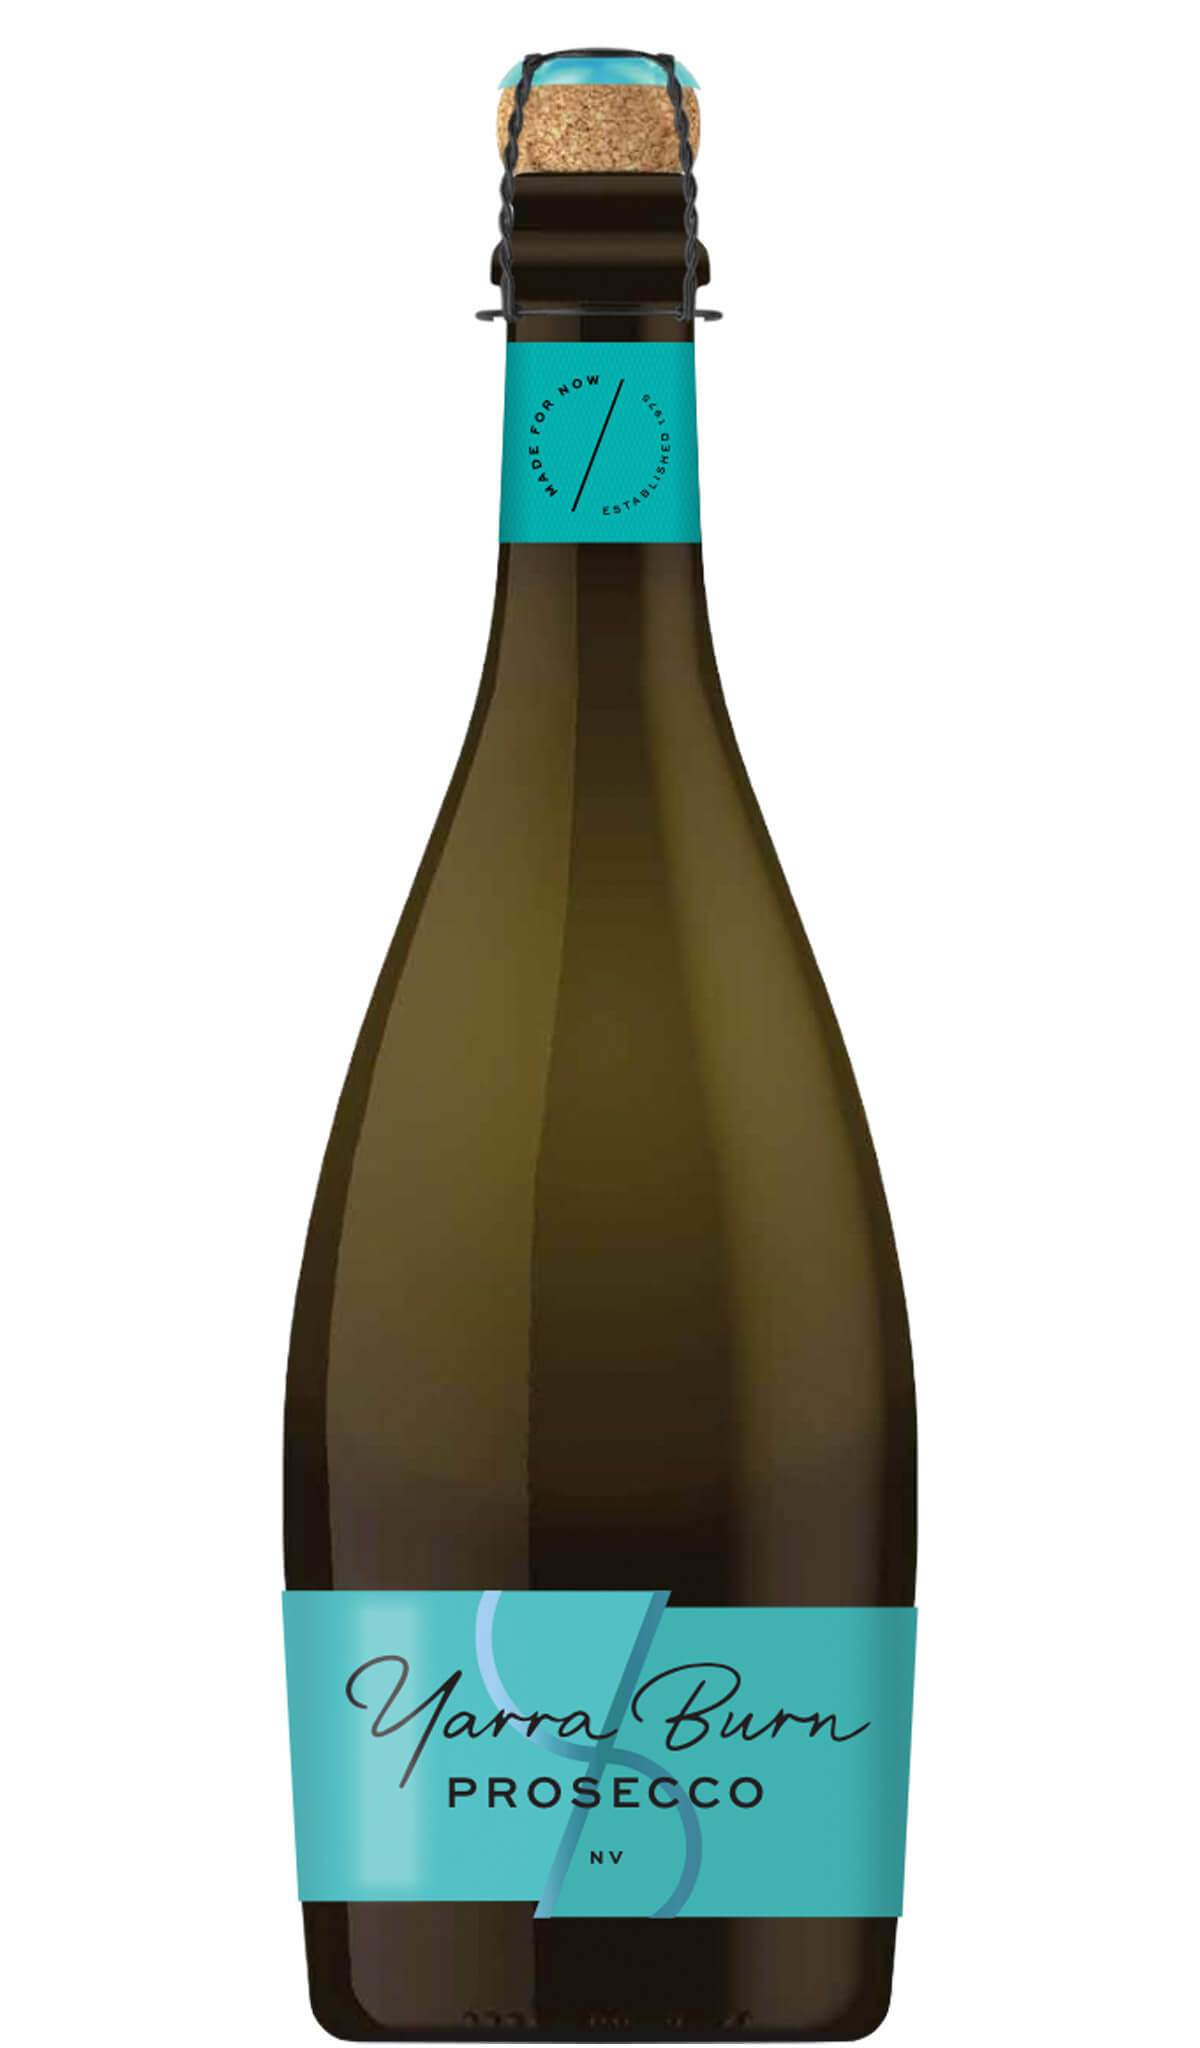 Find out more or buy Yarra Burn Prosecco NV 750ml online at Wine Sellers Direct - Australia’s independent liquor specialists.